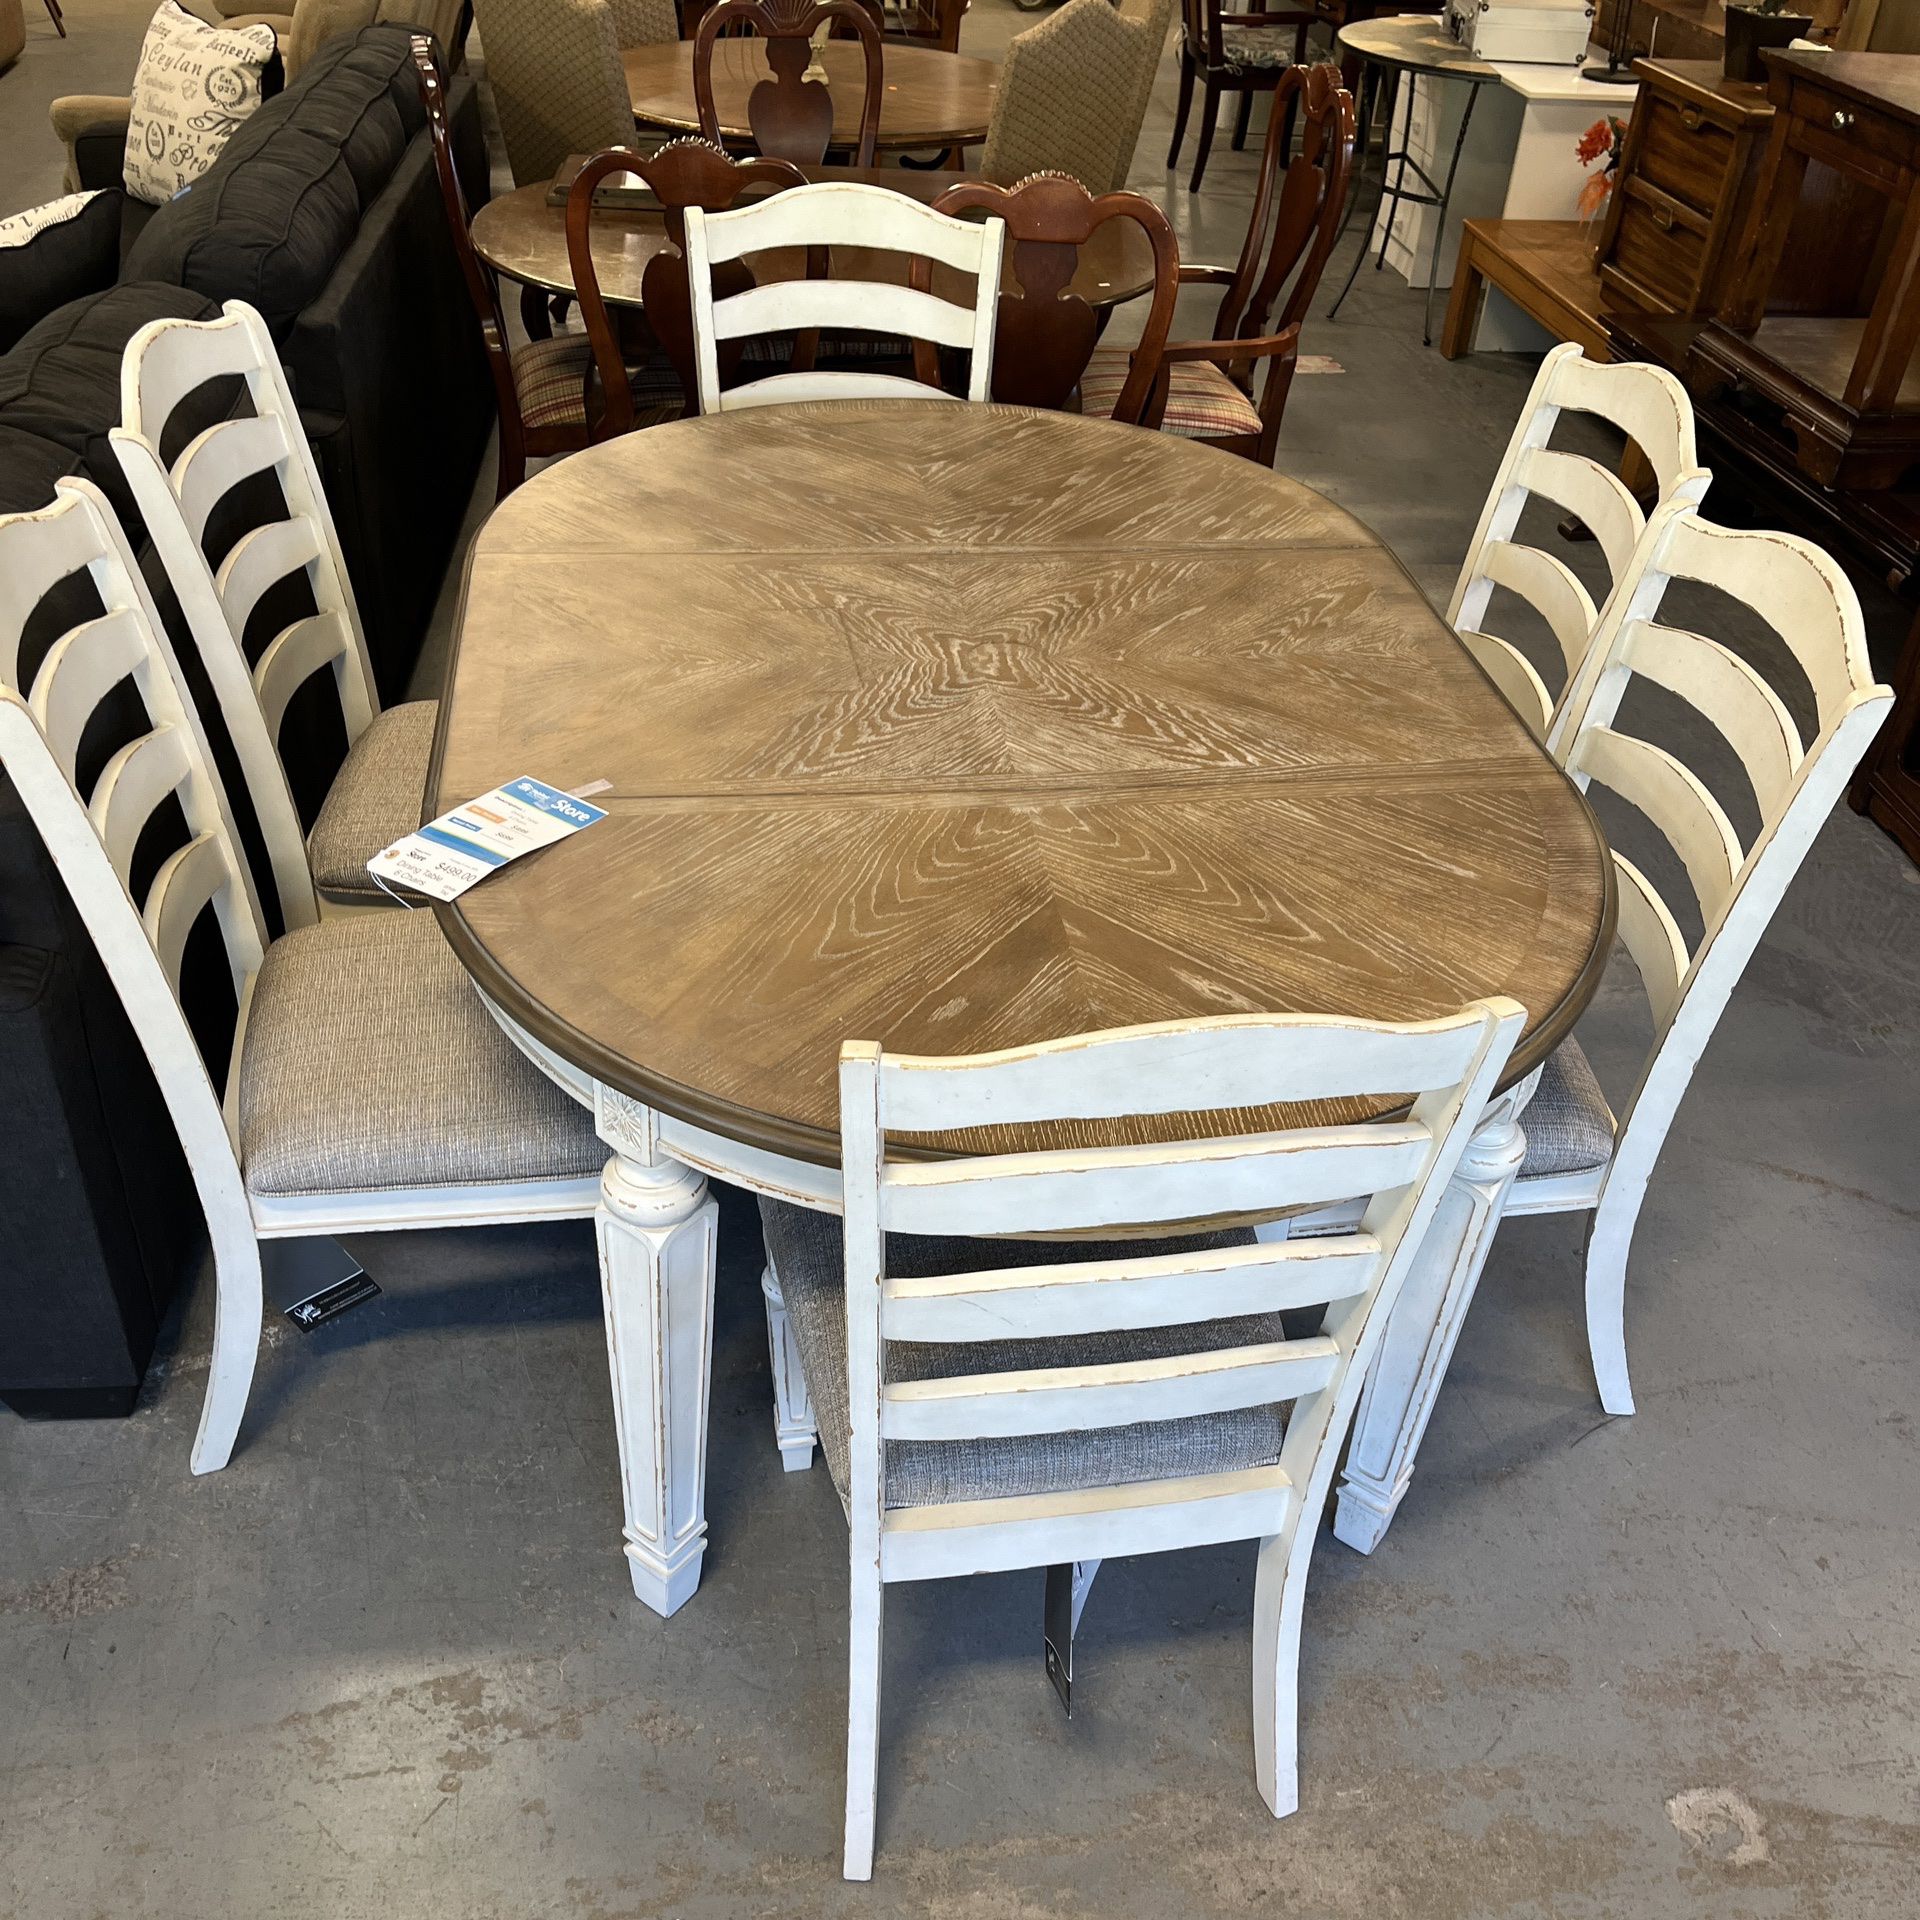 Oval Country Dining Table And Chairs Set New (in Store) 